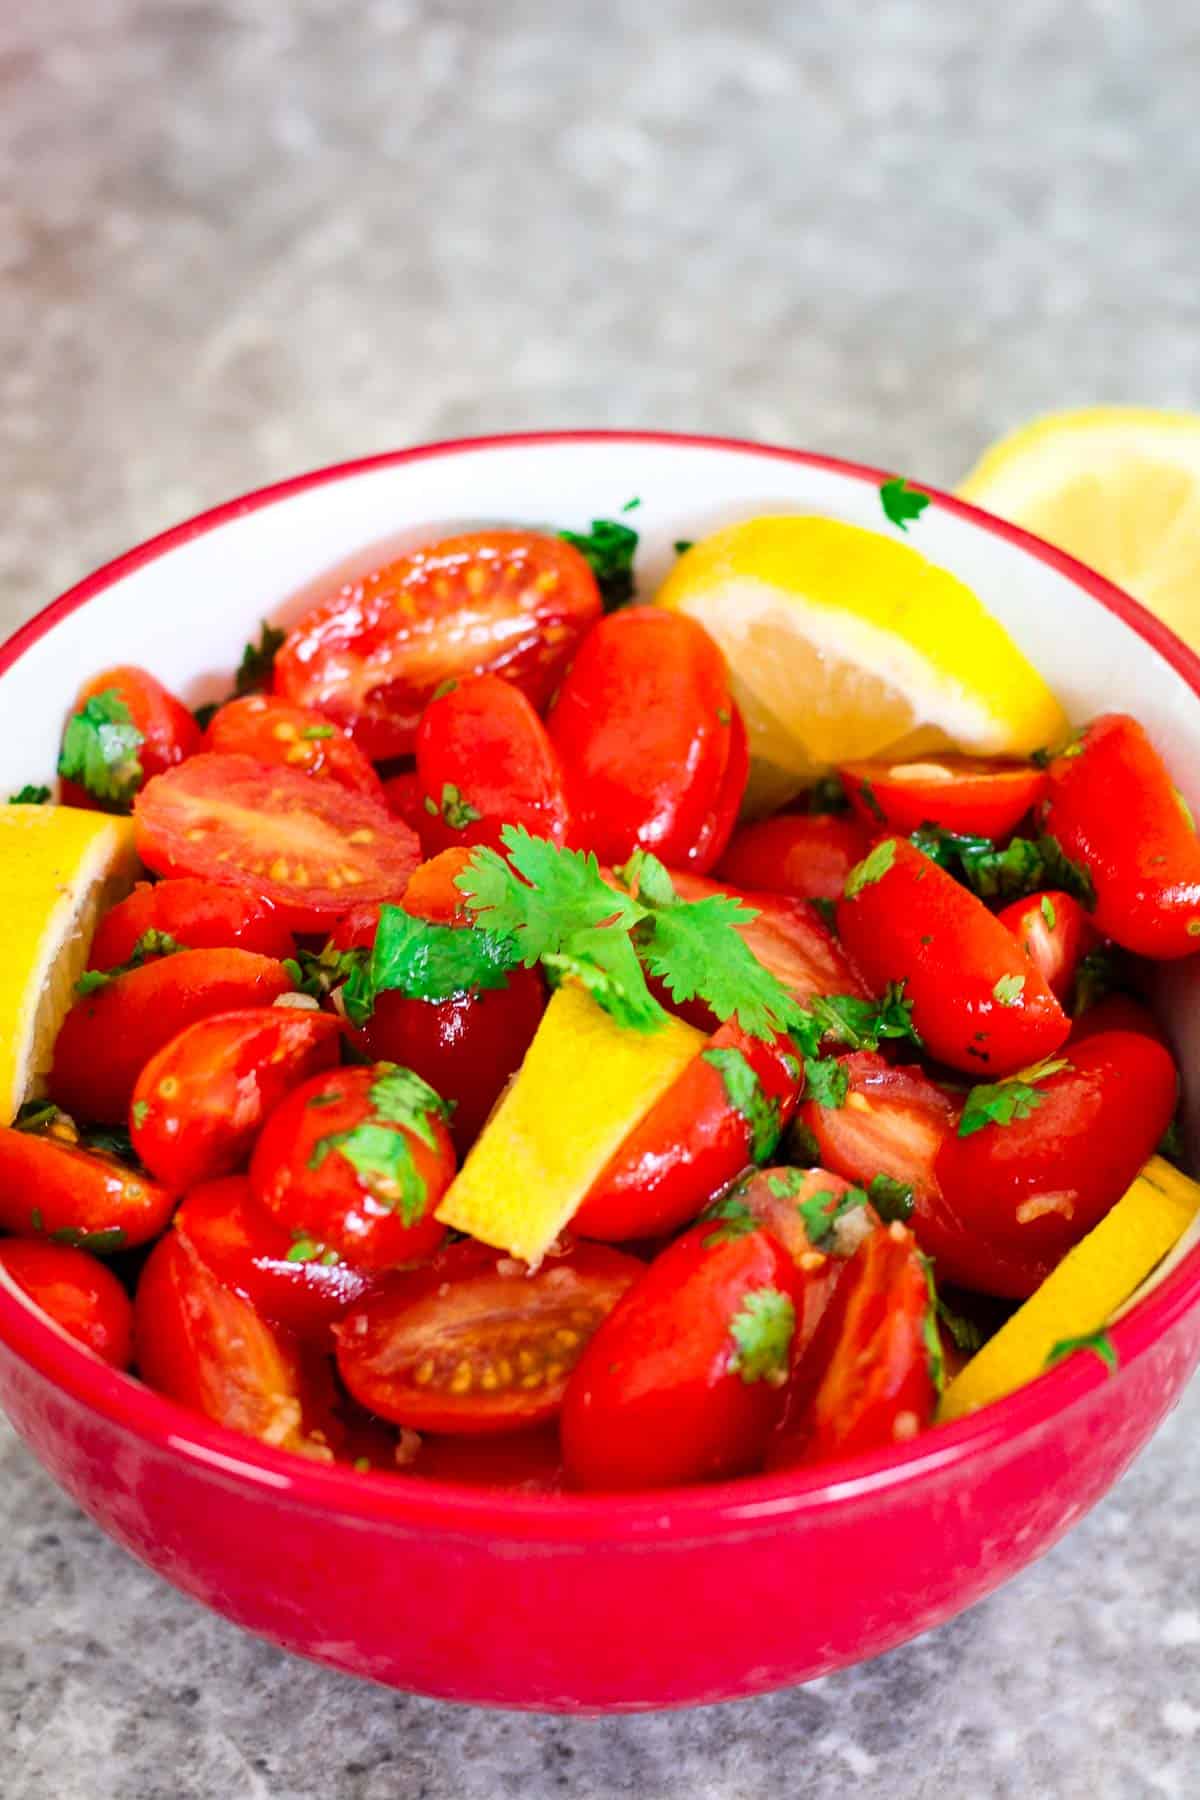 Marinated Cherry Tomatoes on a red bowl, tomatoes are halved and garnished with cilantro and lemon slices.